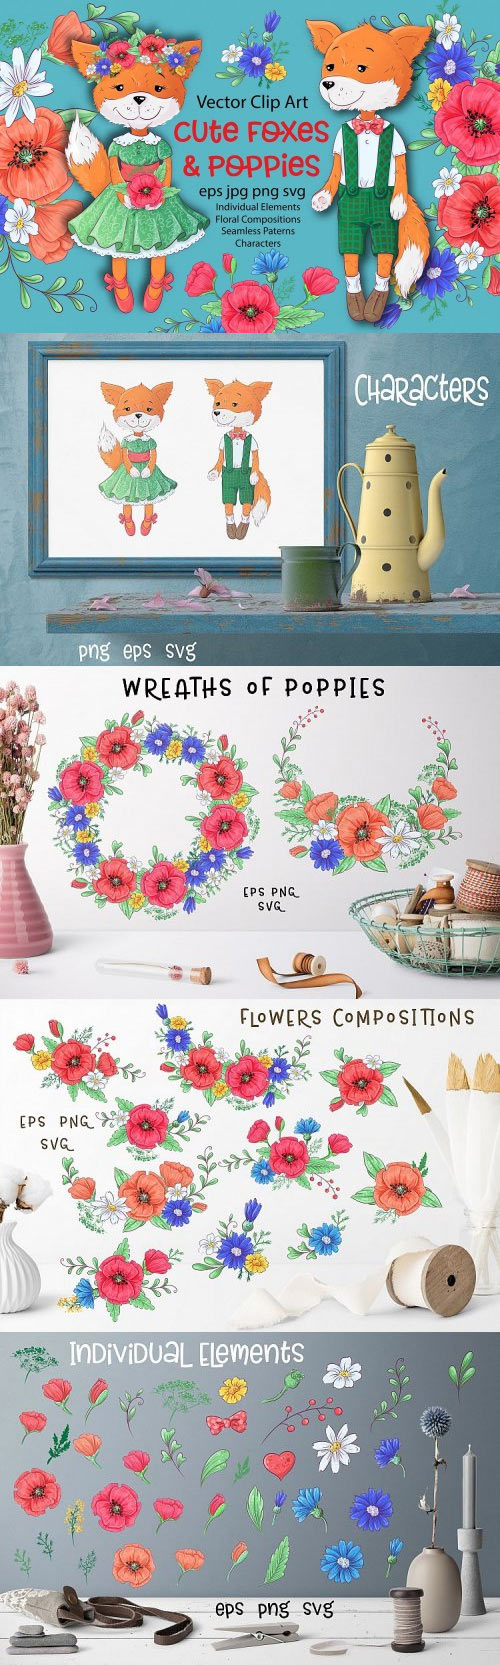 Cute Foxes and Poppies - Vector Clip Art